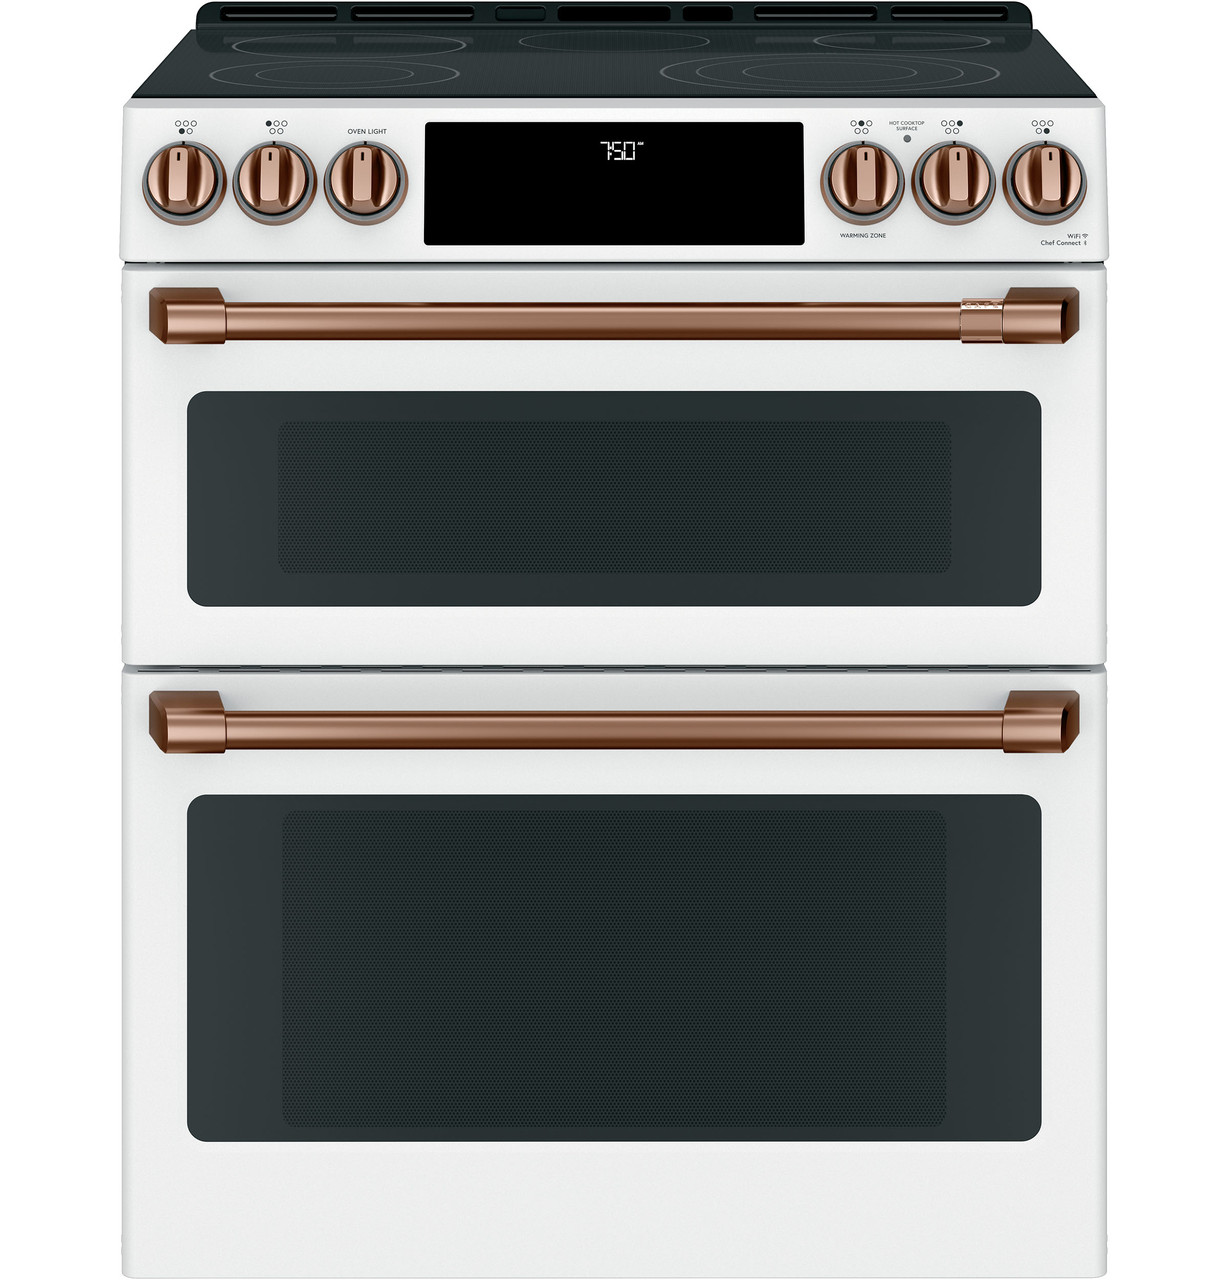 Is this acceptable for an oven light? : r/appliancerepair